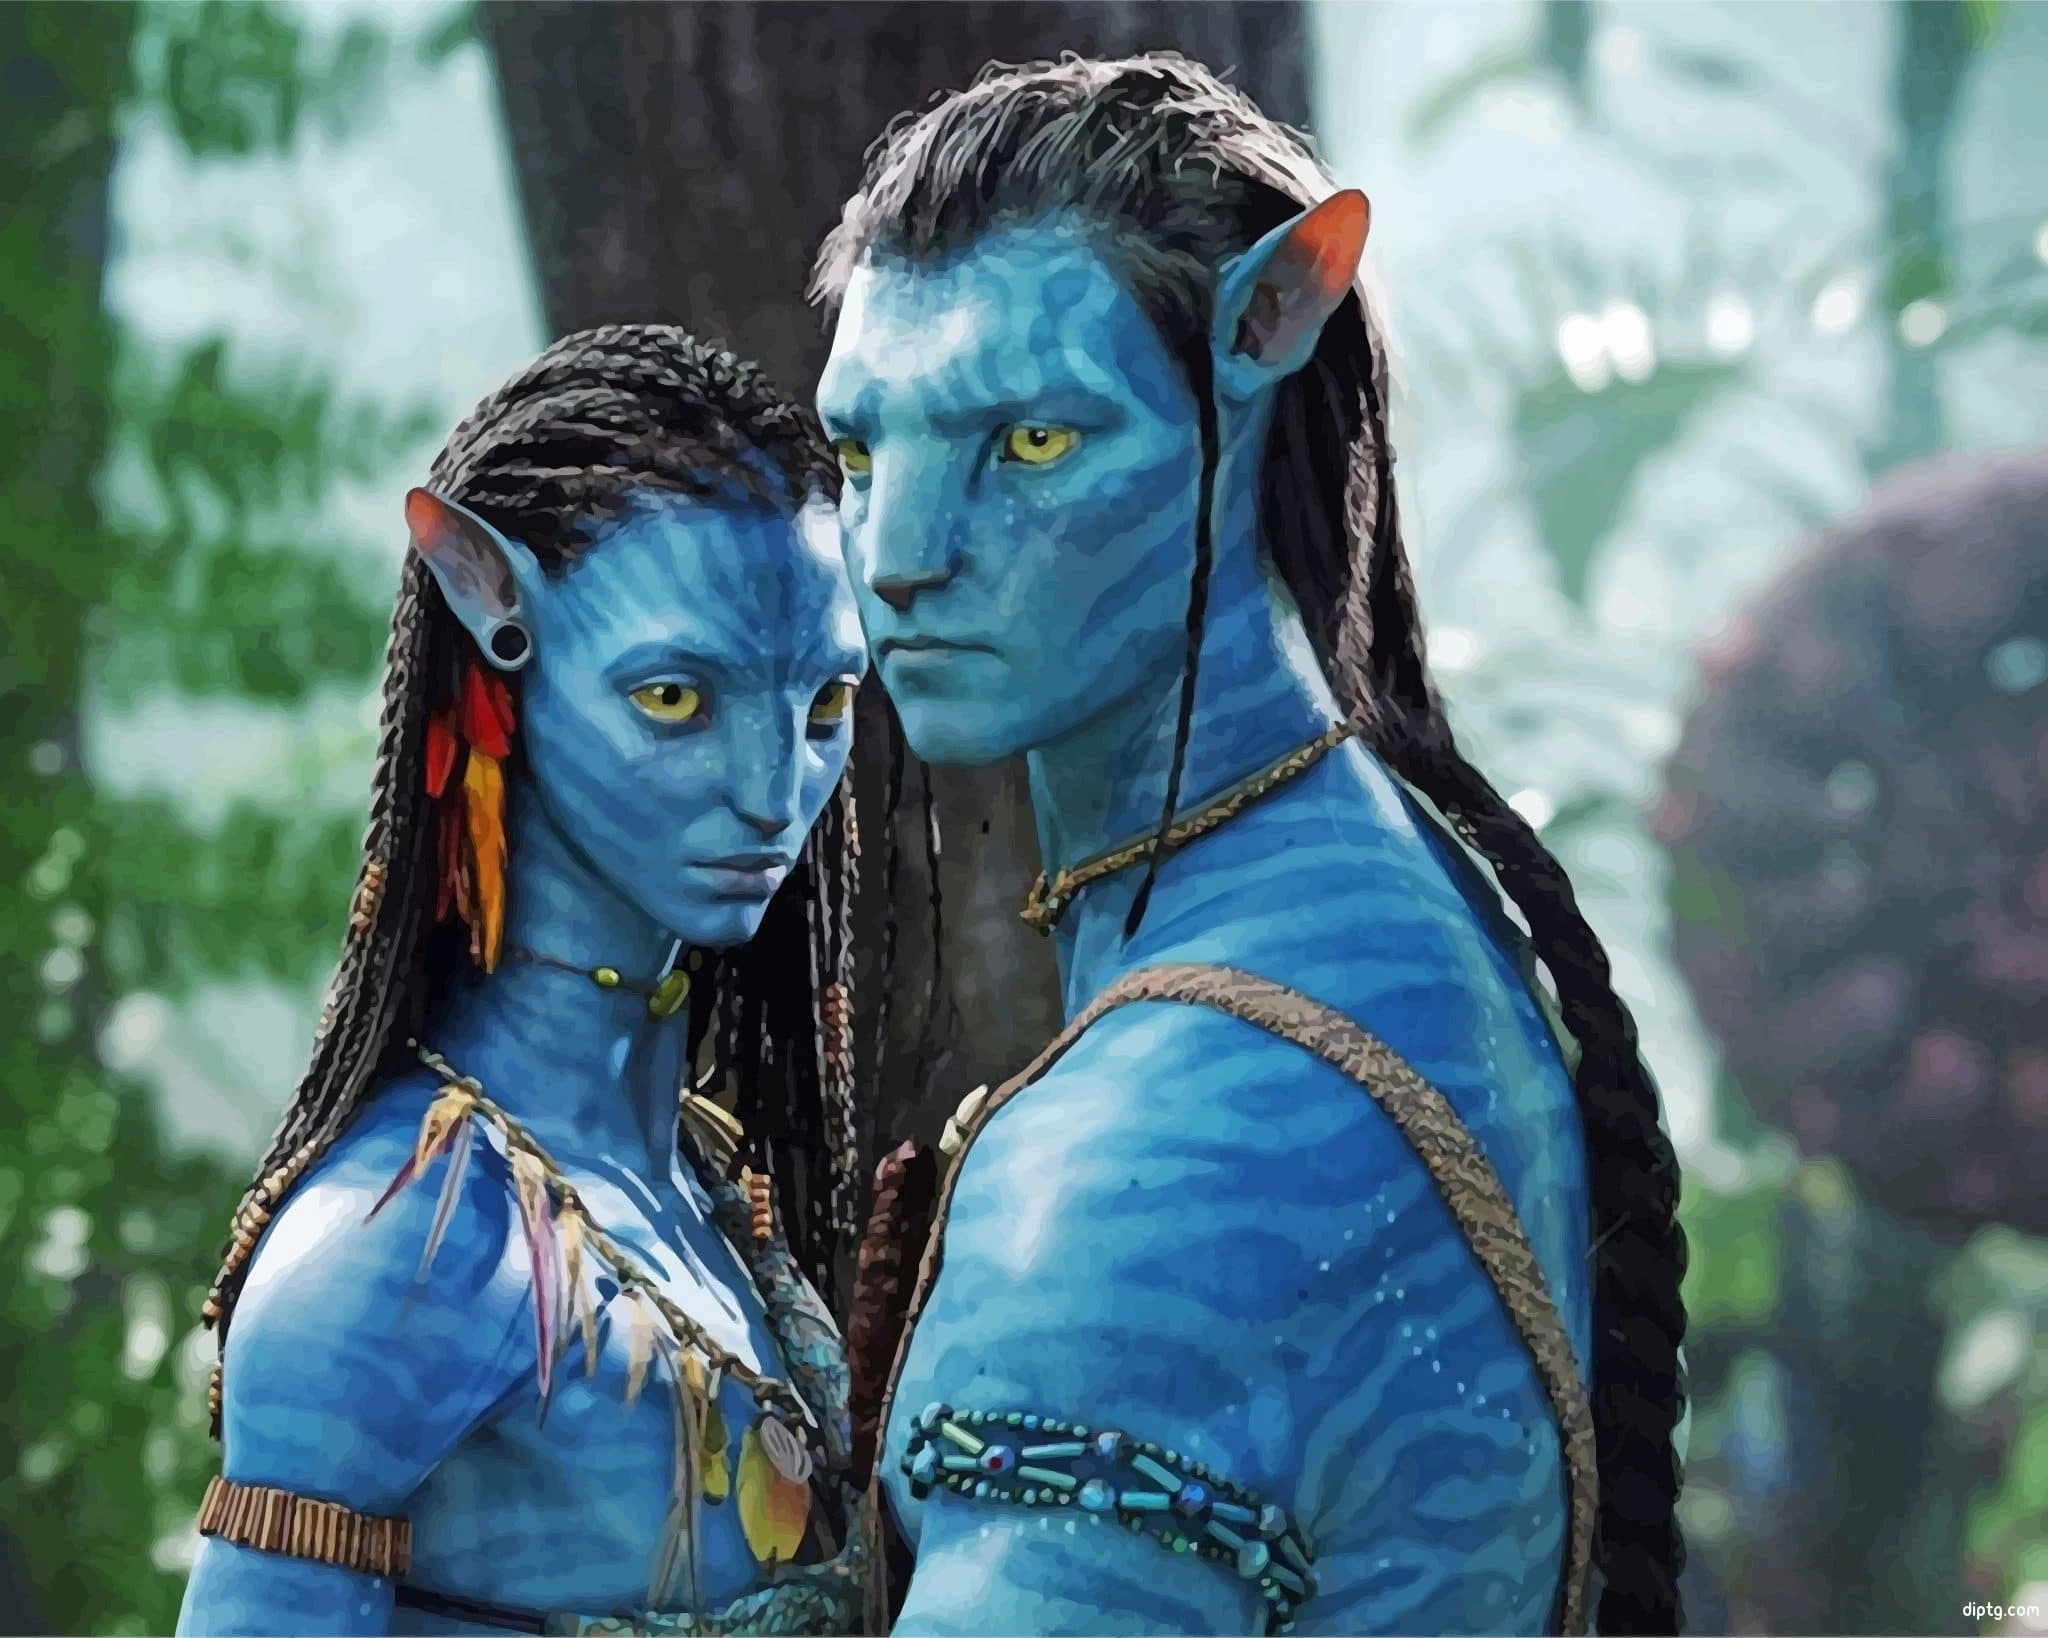 Jake Sully And Neytiri Avatar Painting By Numbers Kits.jpg